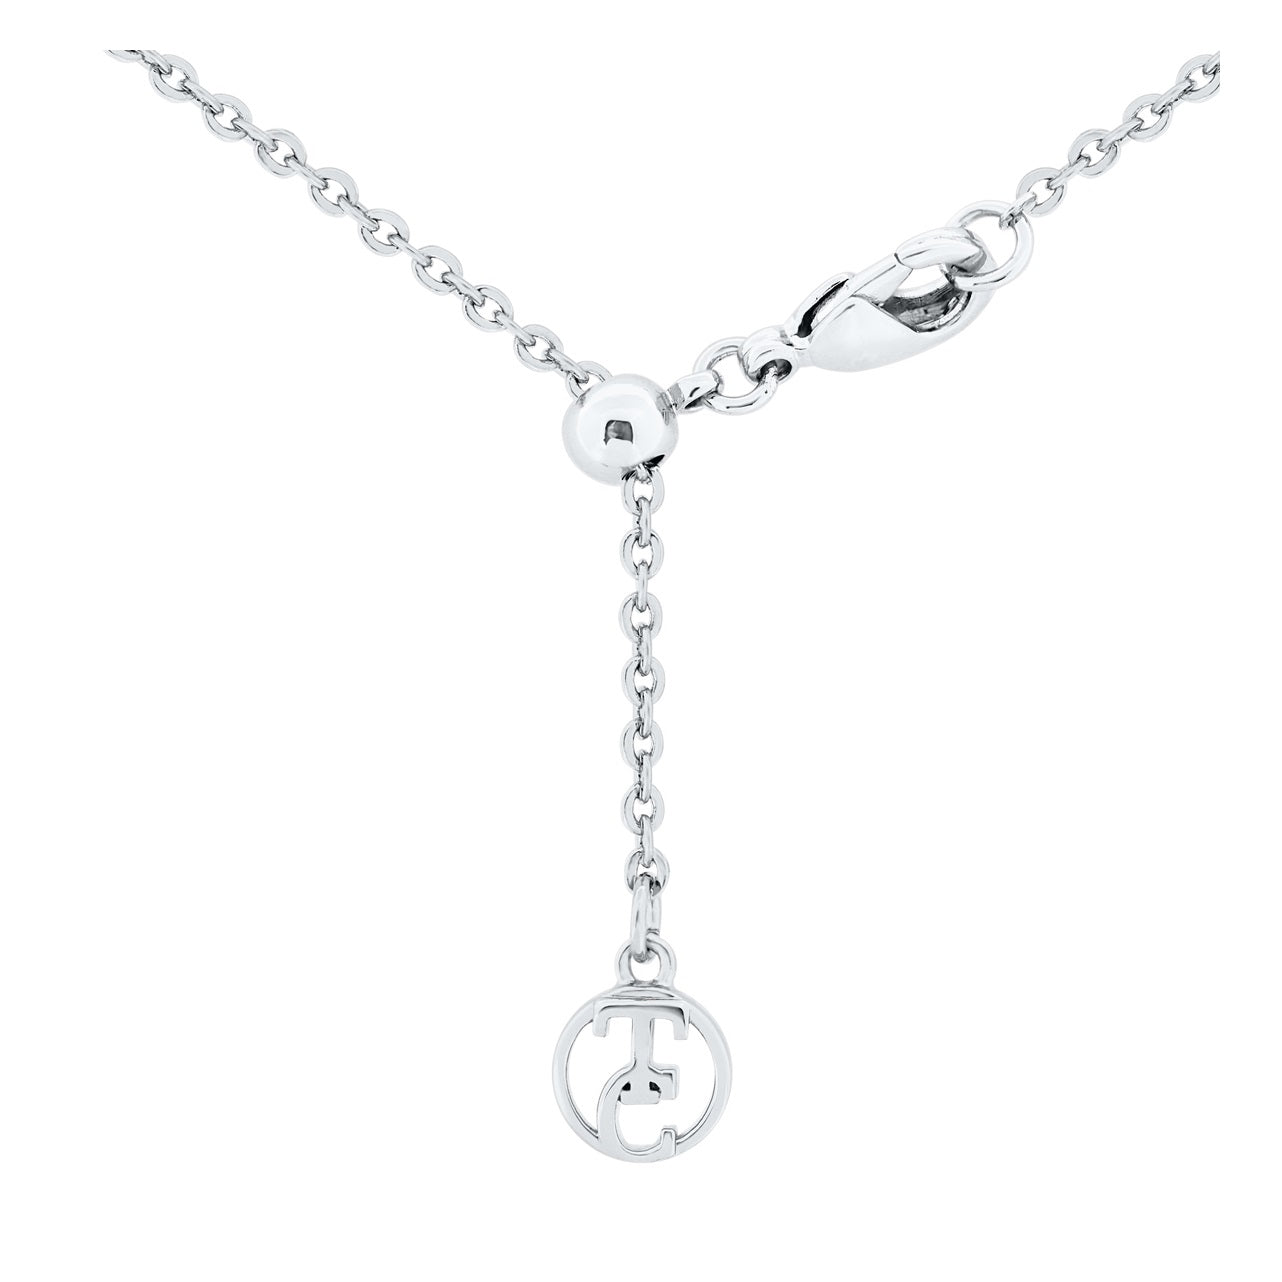 Tipperary Crystal Heart Pave Coin Silver Pendant